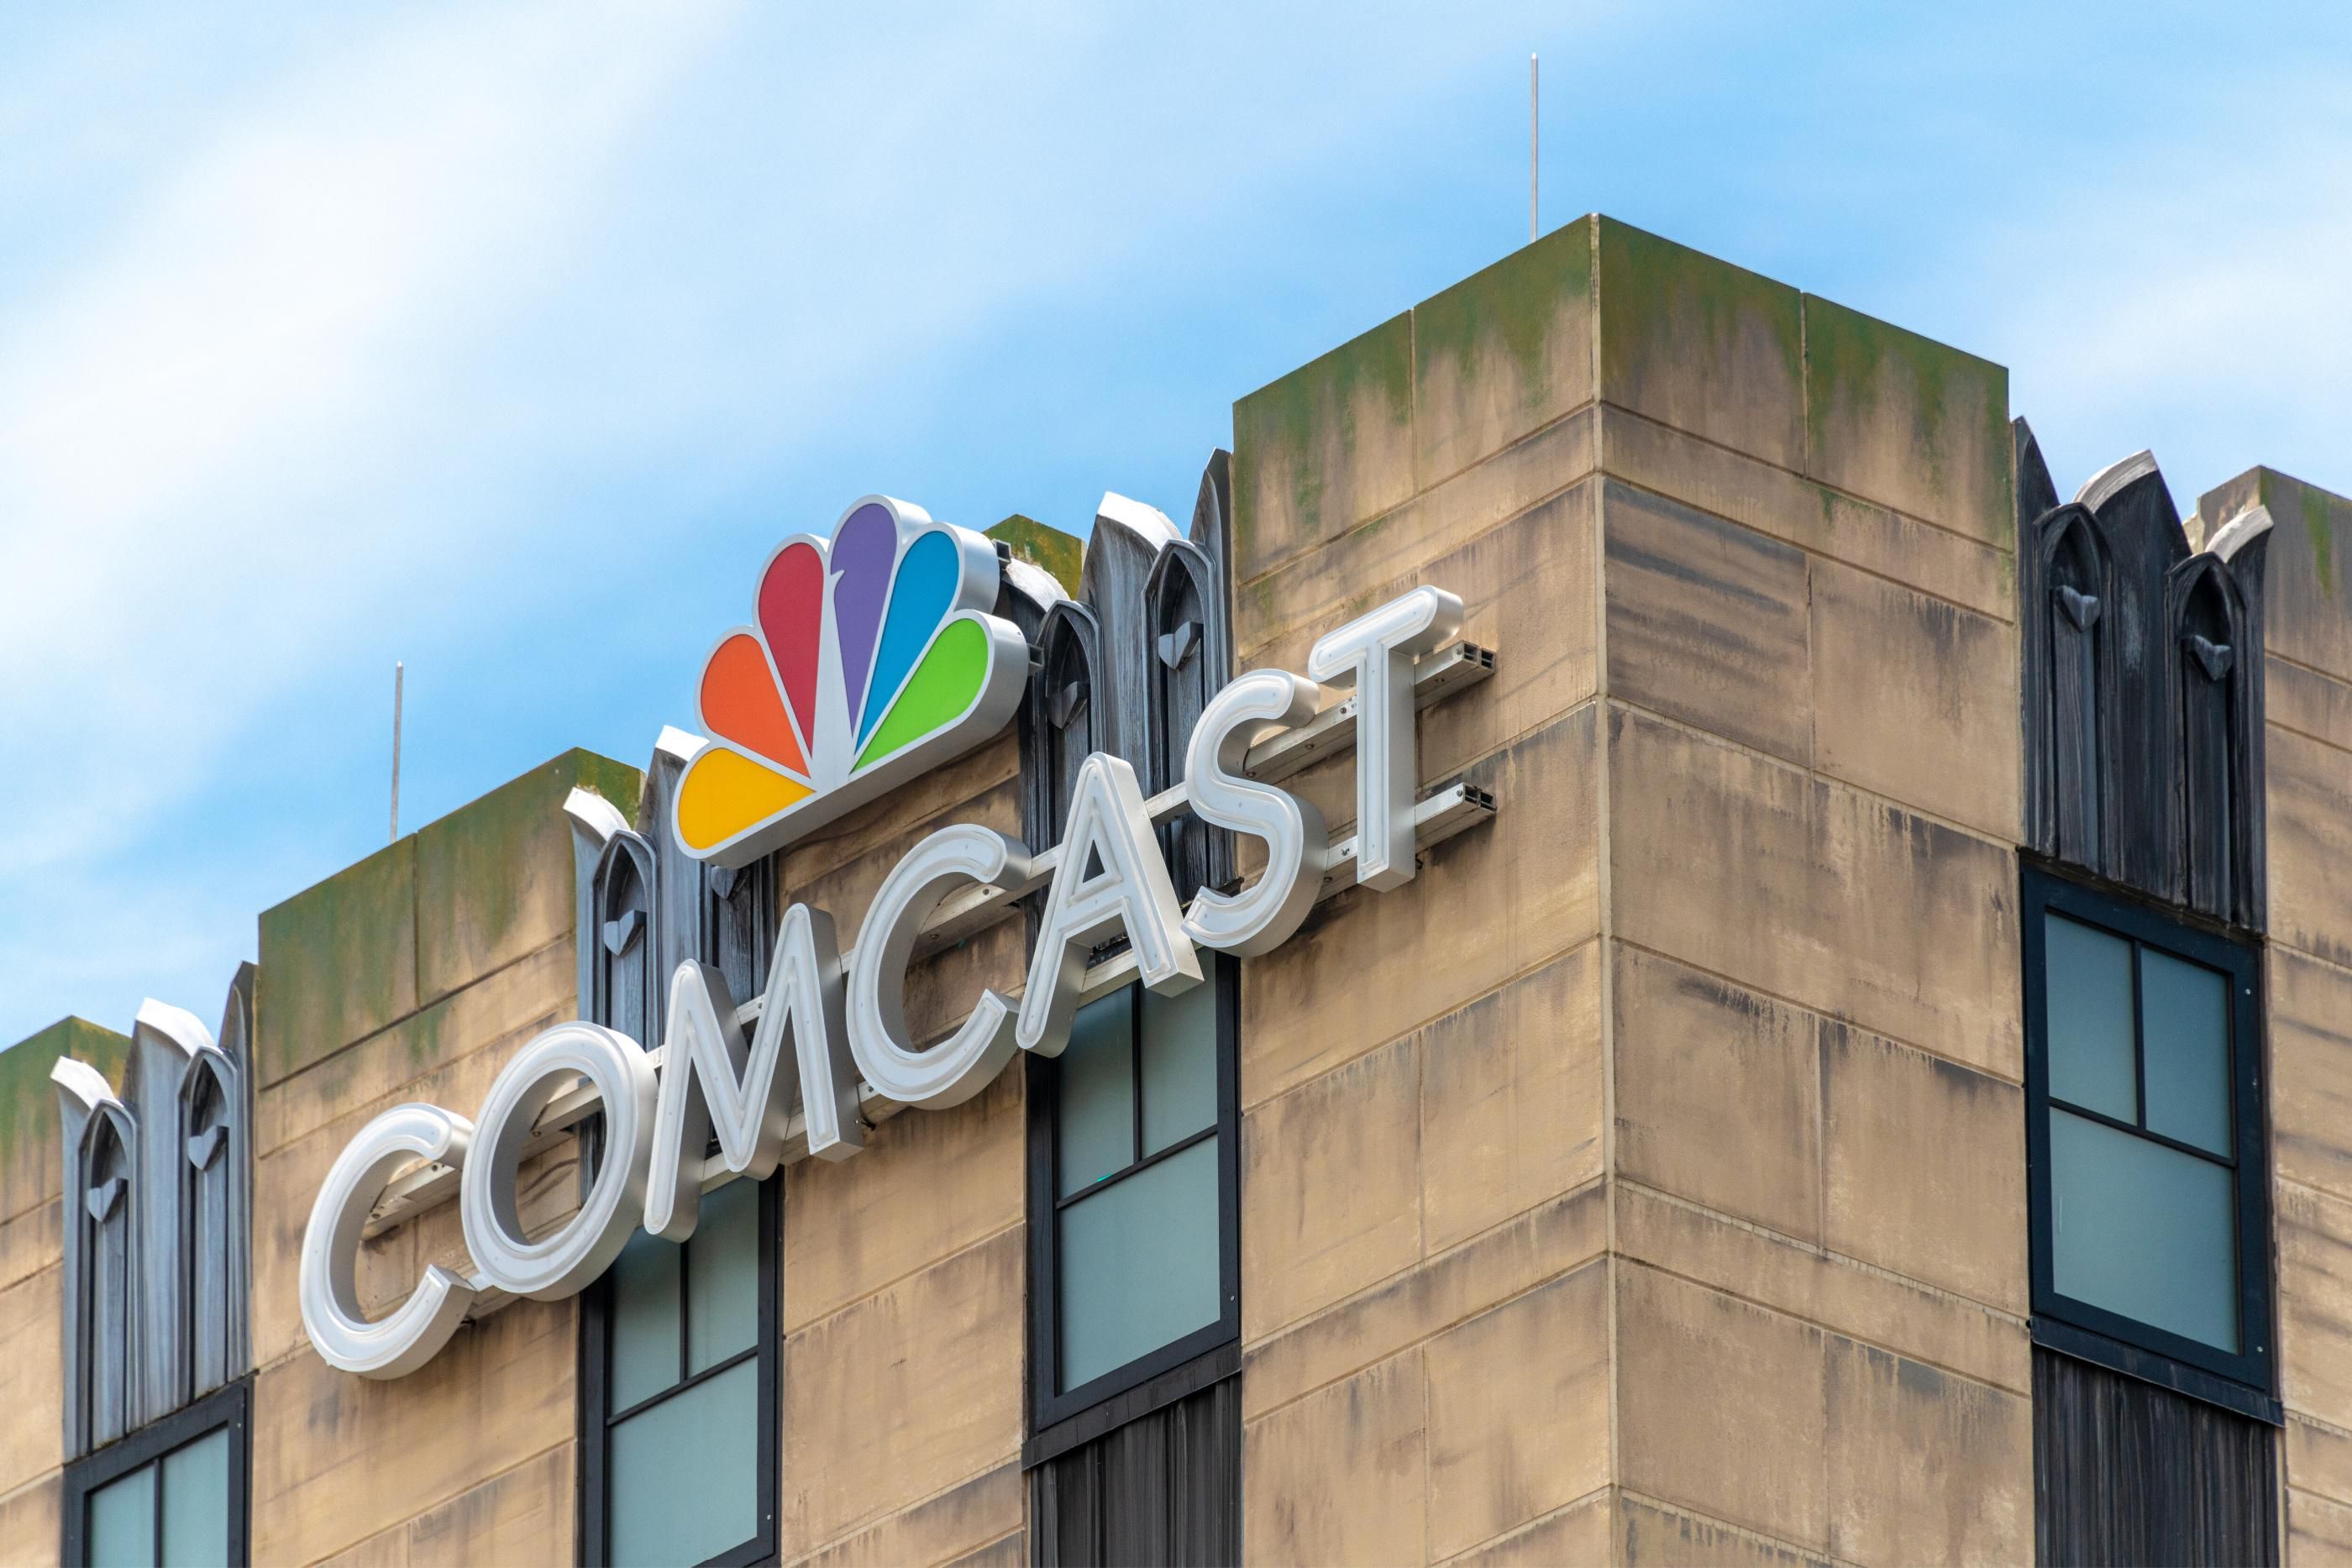 Comcast's logo is seen on the wall of a building at Universal Studios in Orlando, Florida. (Photo: Roberto Machado Noa/LightRocket via Getty Images)